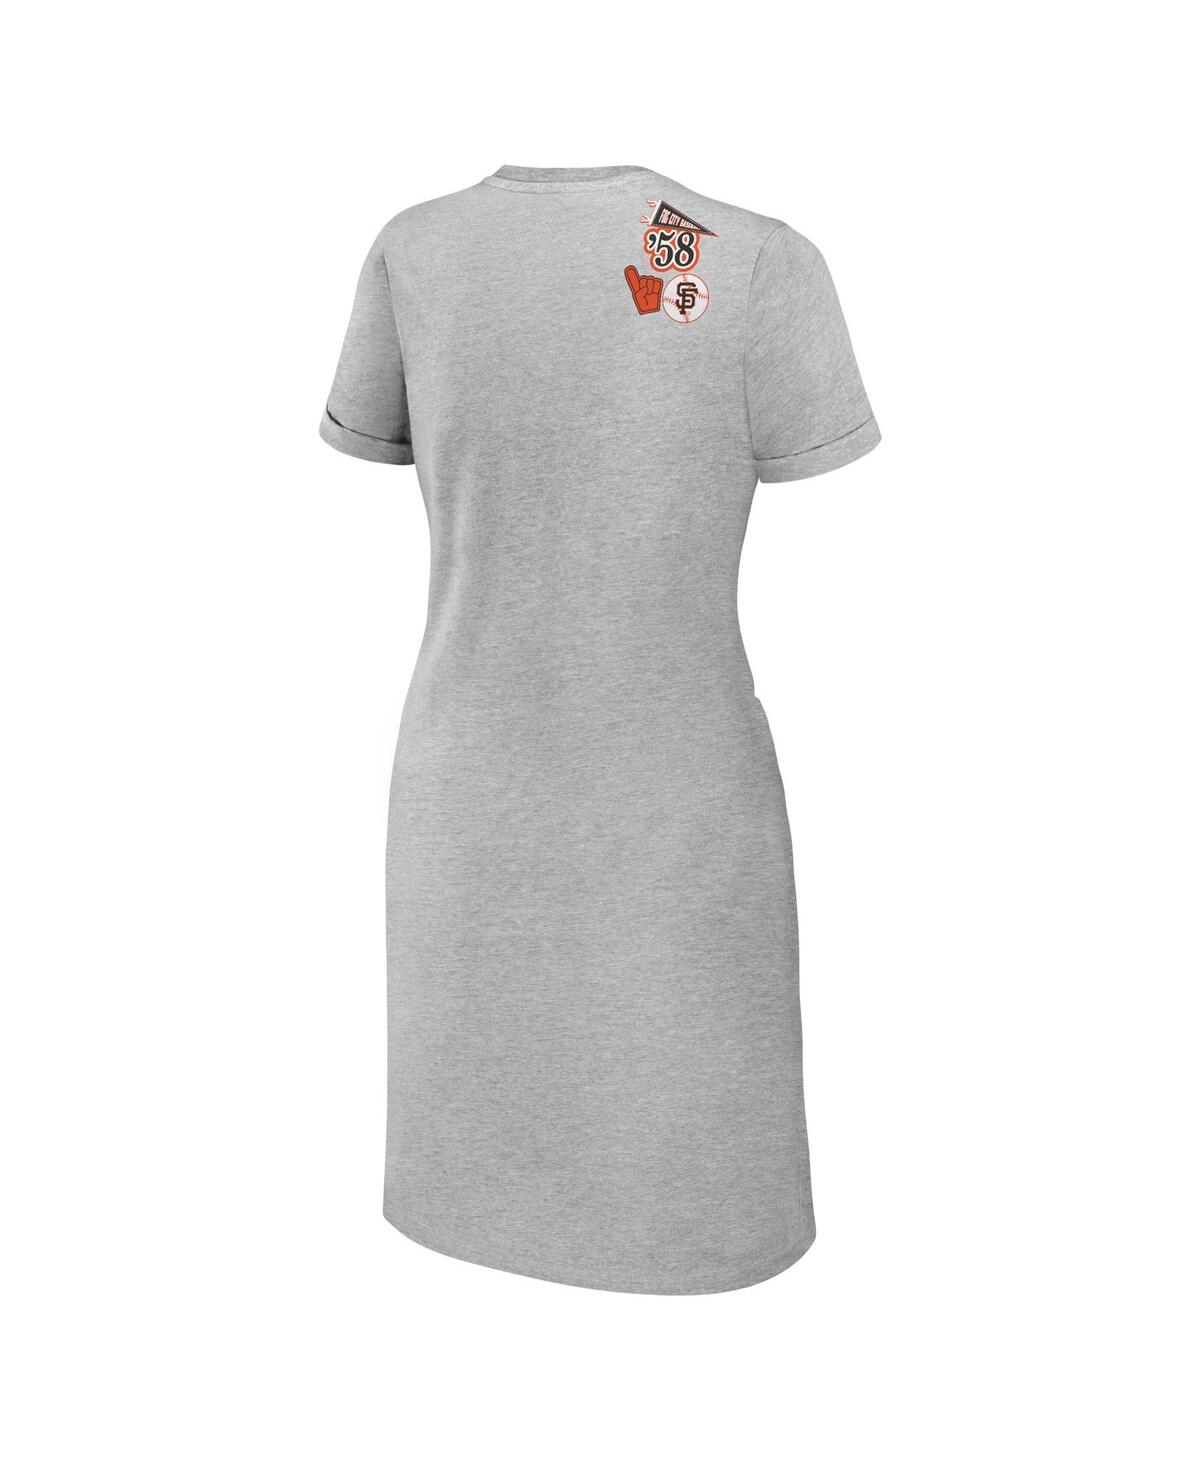 Shop Wear By Erin Andrews Women's  Heather Gray San Francisco Giants Knotted T-shirt Dress